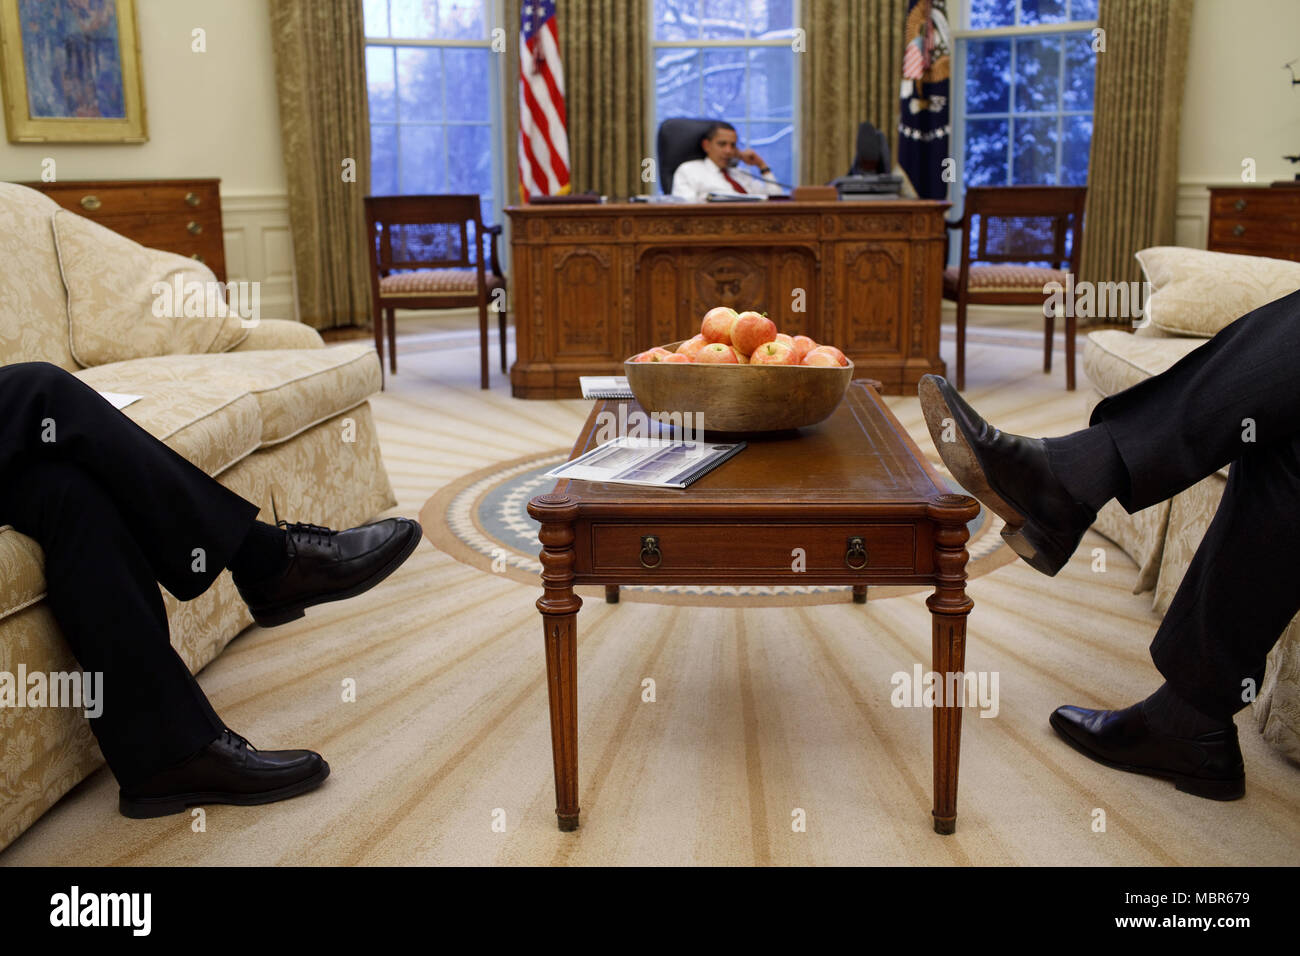 National Security Council staff members sit in the Oval Office while President Obama speaks to foreign leaders 1/27/09. Official White House Photo by Pete Souza Stock Photo